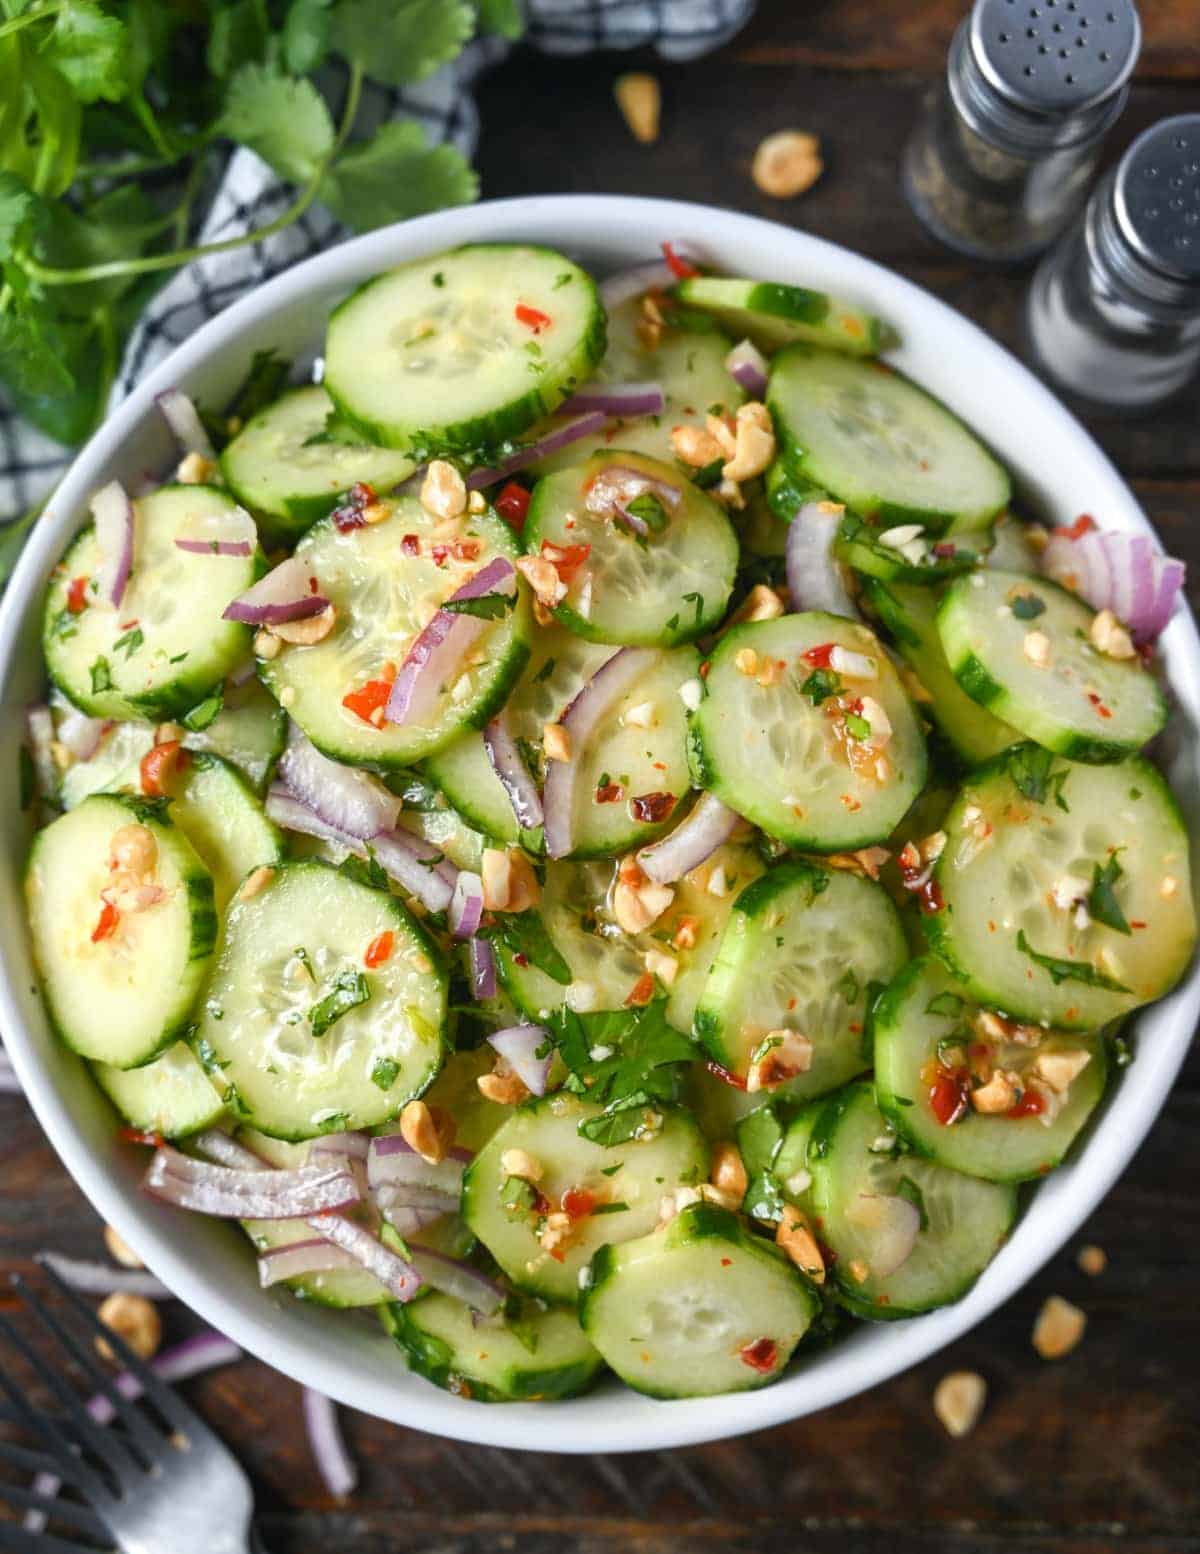 A big white bowl of cucumber salad with red onions and peanuts on top.